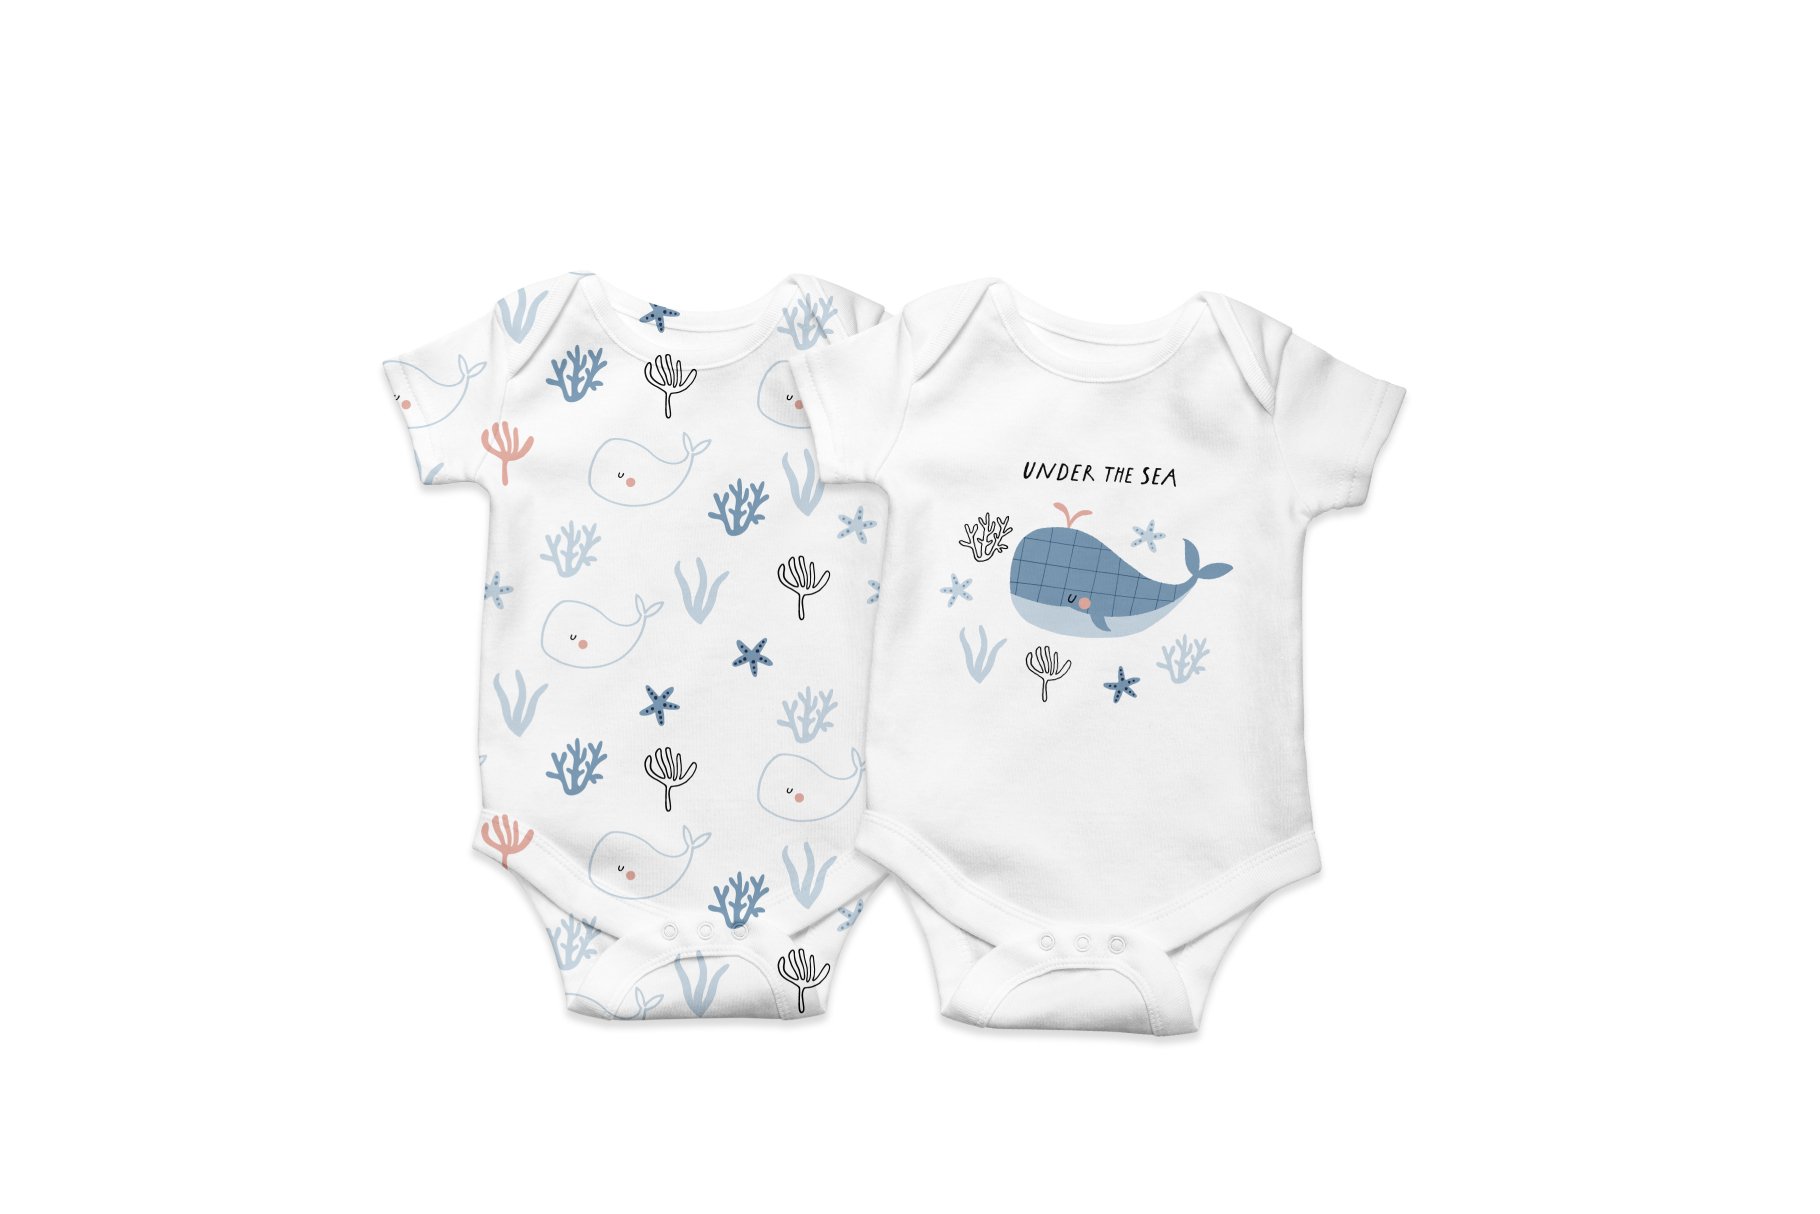 Baby white and blue bodysuit design with whales.